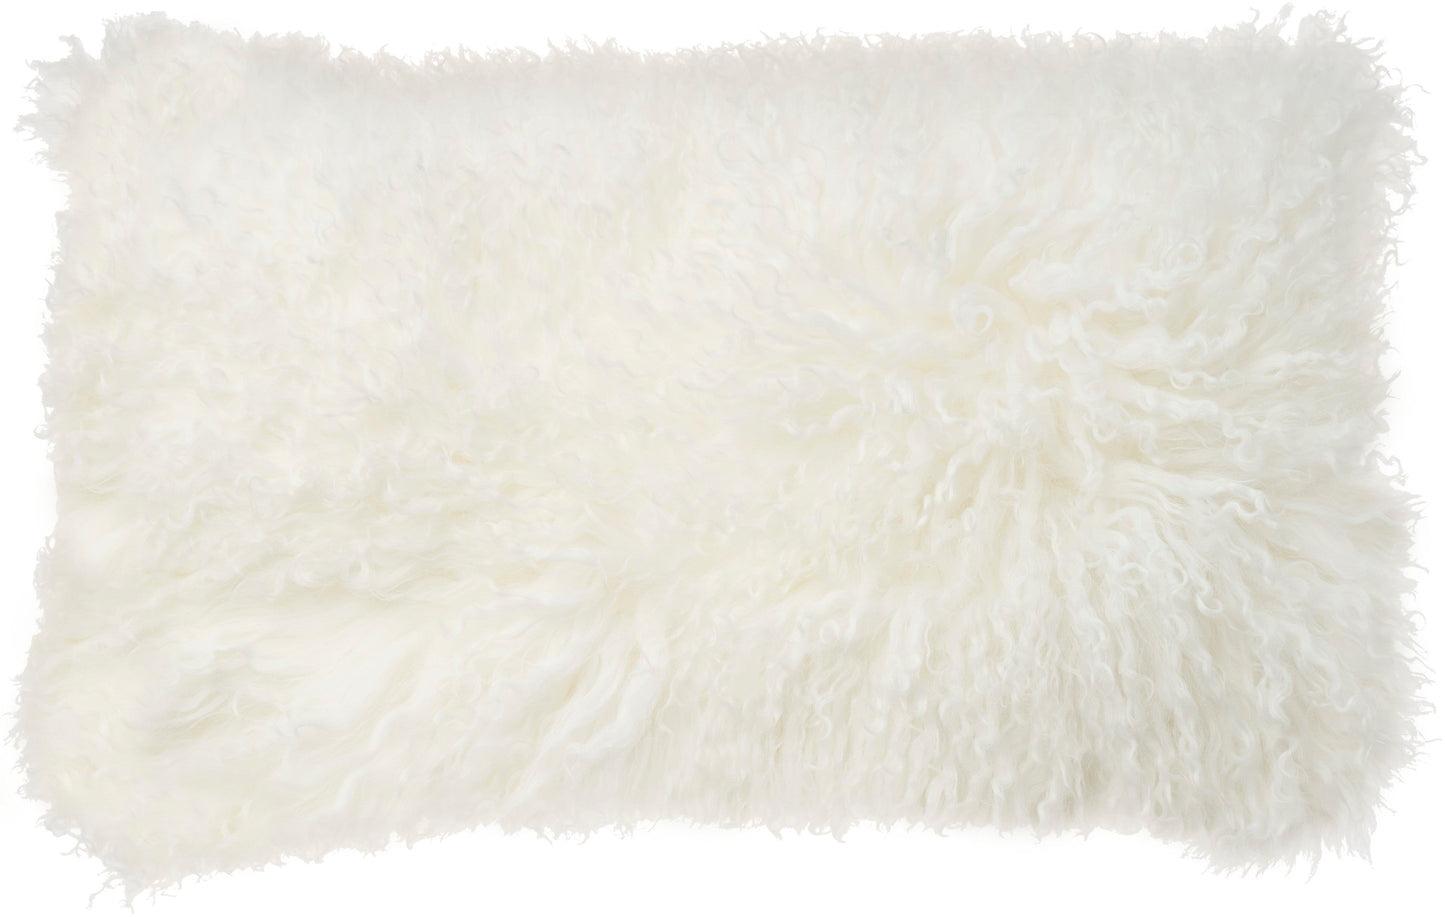 Couture Fur PR101 Leather Tibetan Lamb Pillow Throw Pillow From Mina Victory By Nourison Rugs